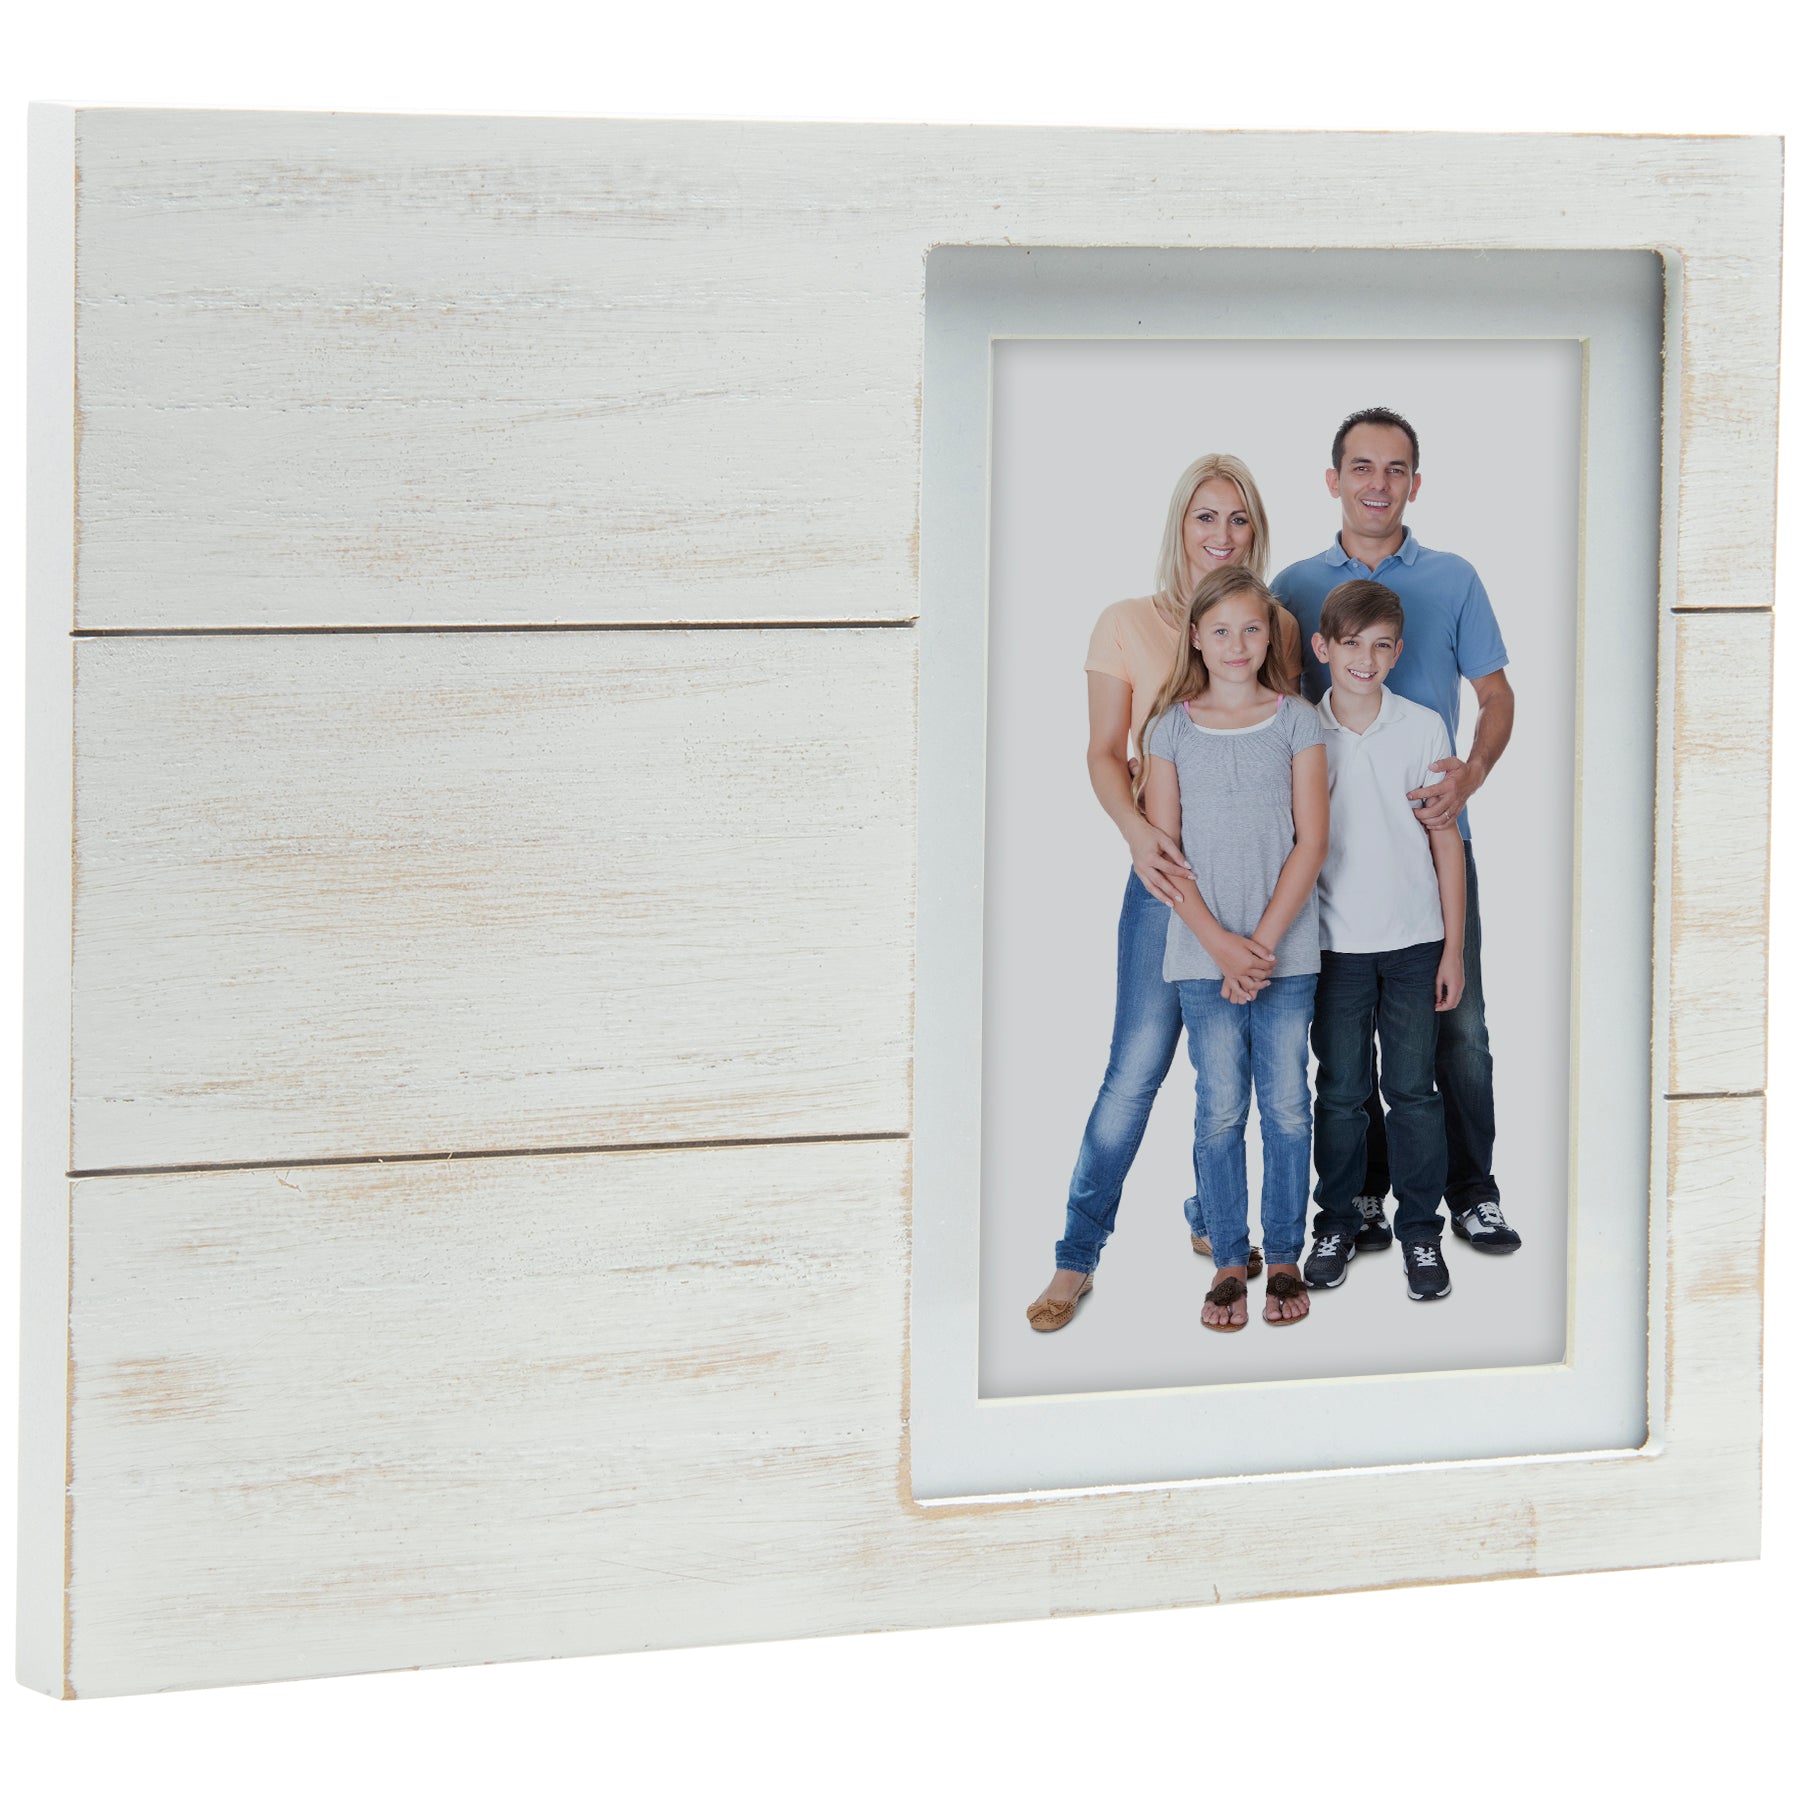 Vertical White Distressed Wood Picture Frame - 4x6 or 5x7 Photos